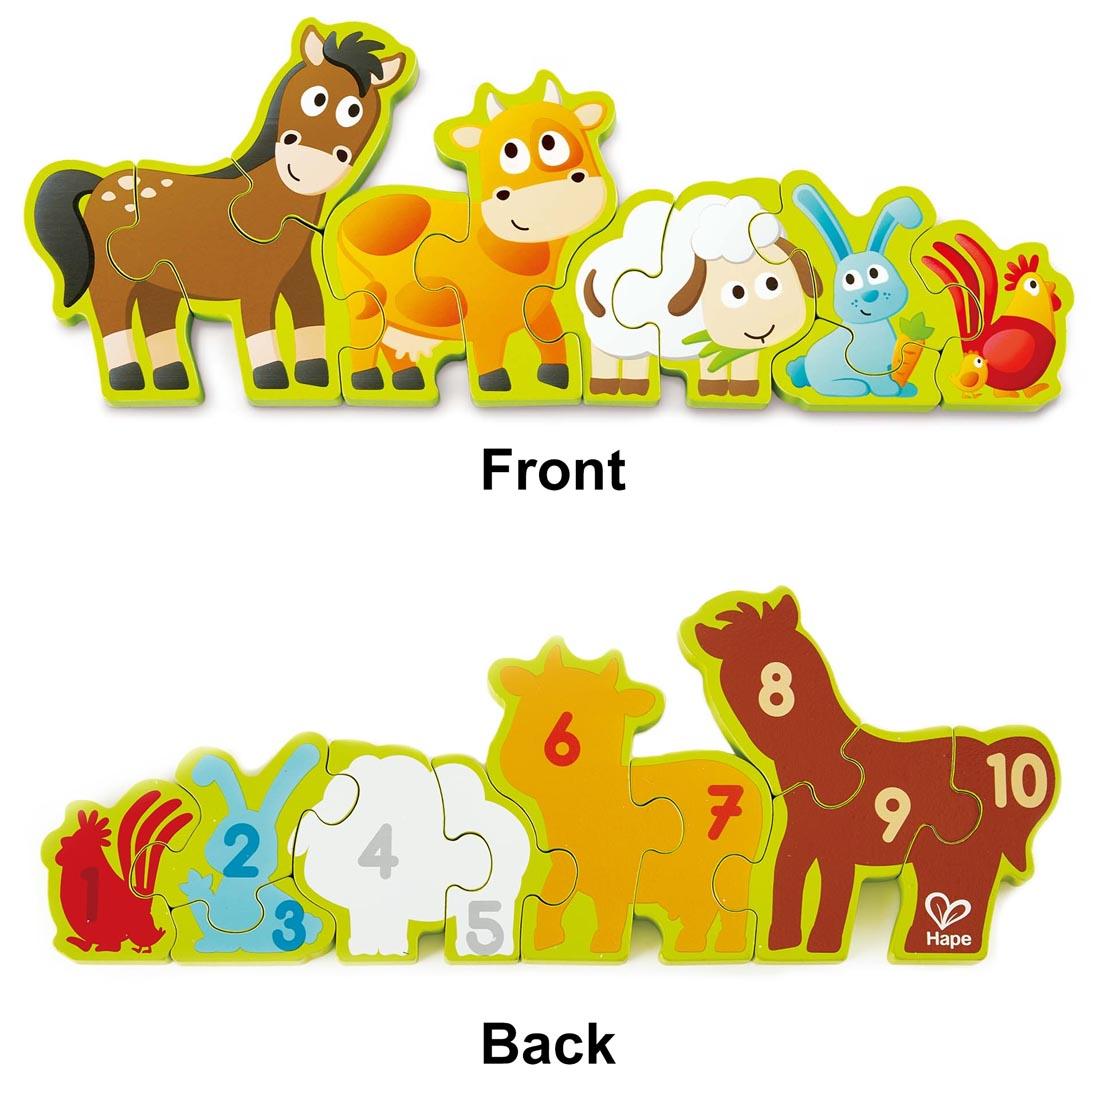 10-Piece Numbers & Farm Animals Puzzle By Hape labeled and shown both Front and Back